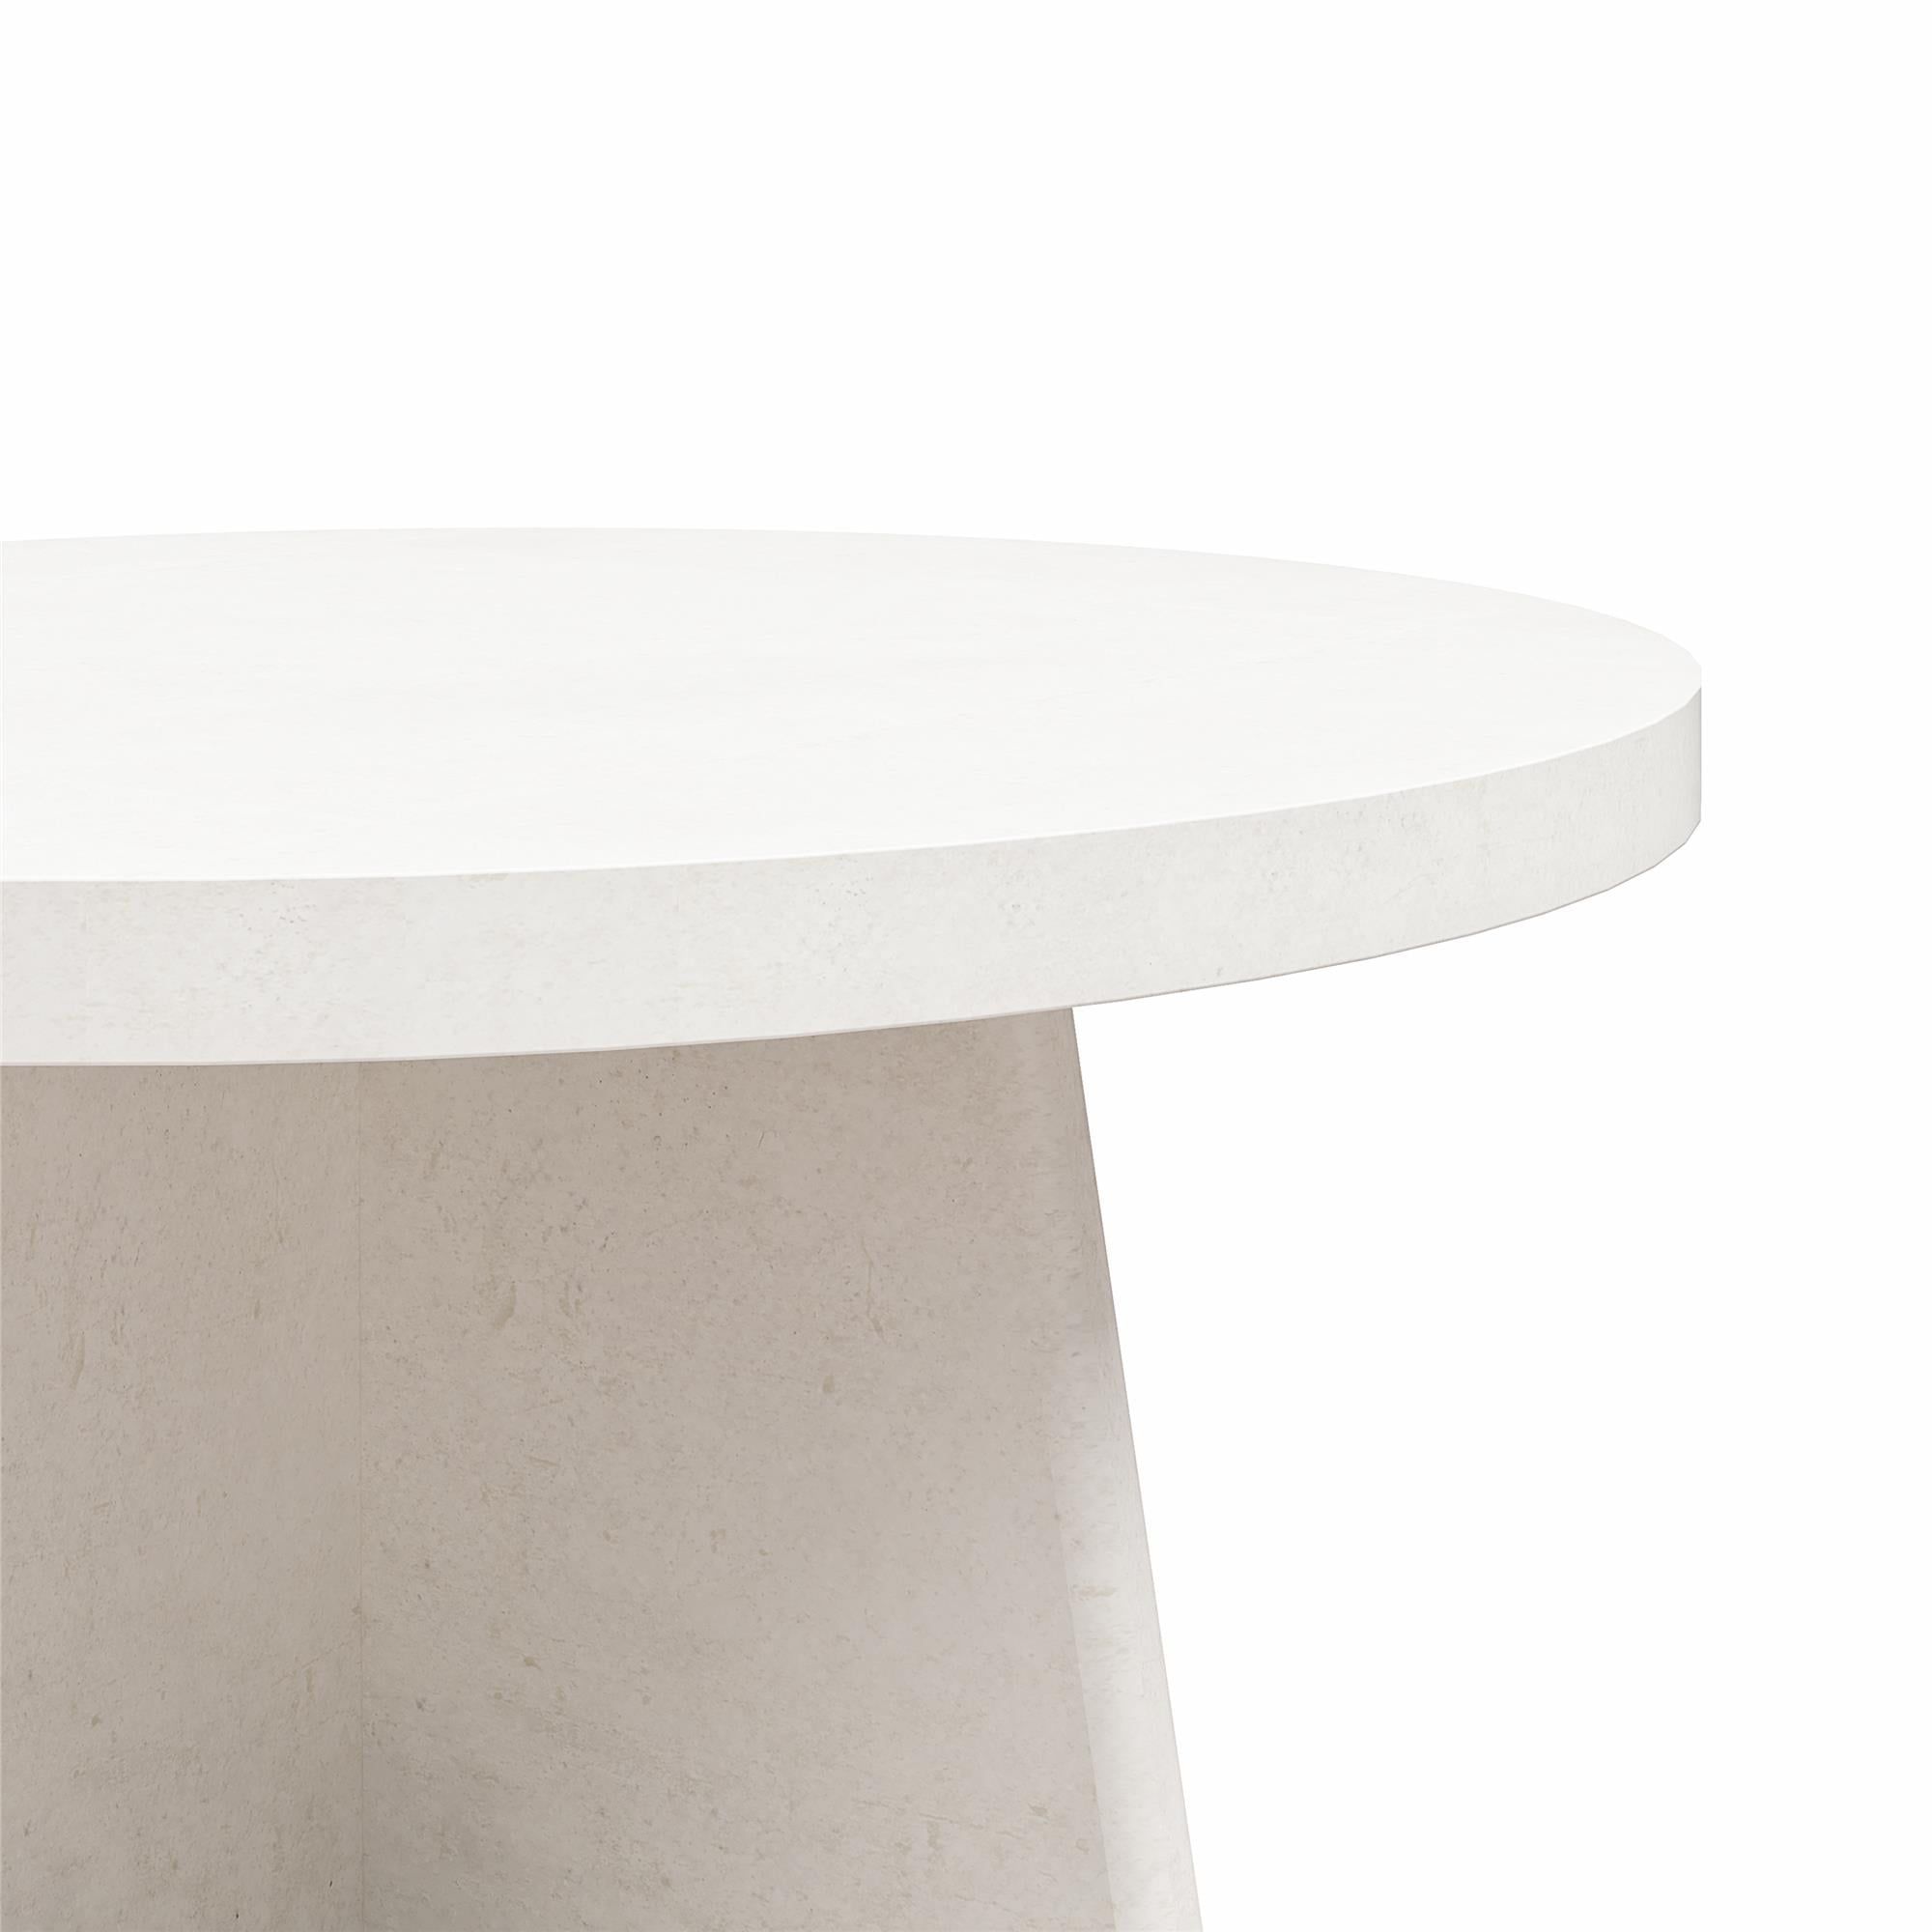 Queer Eye Liam Round Coffee Table, Plaster | Bigbigmart Regarding Liam Round Plaster Coffee Tables (View 2 of 15)